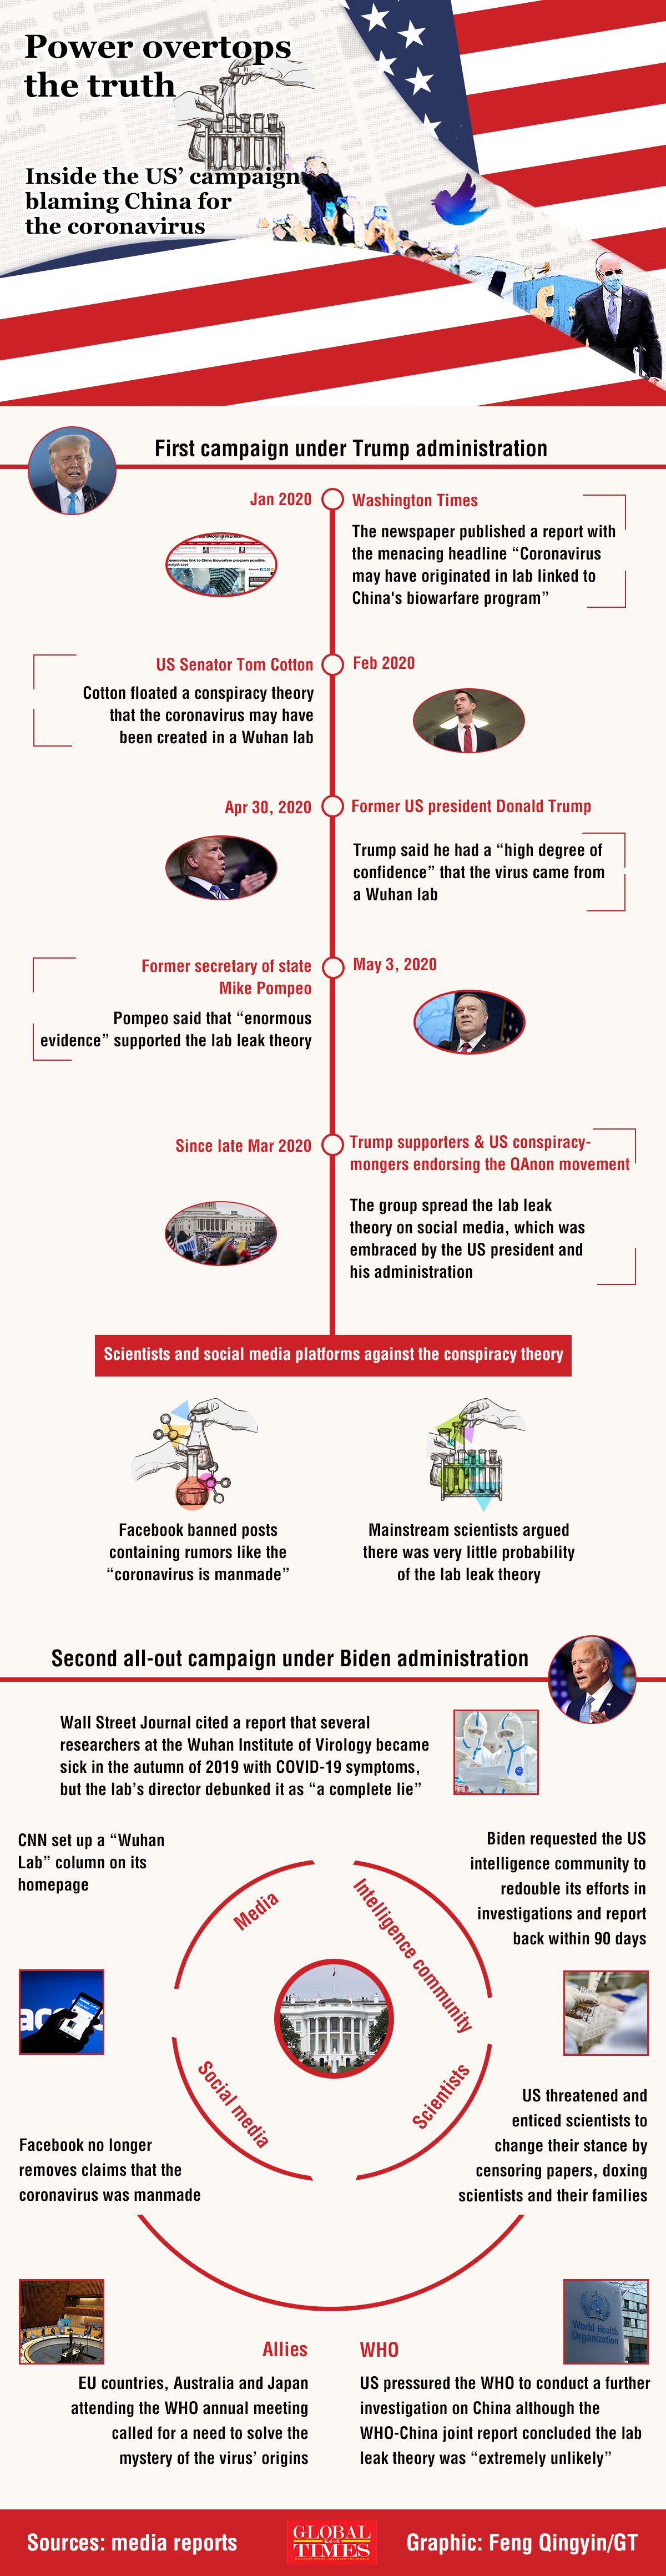 What steps did the US take to stigmatize China on virus origins tracing, and who is behind it? GT reveals four-step US misinformation campaign on the virus origins tracing. Graphic: Feng Qingyin/GT